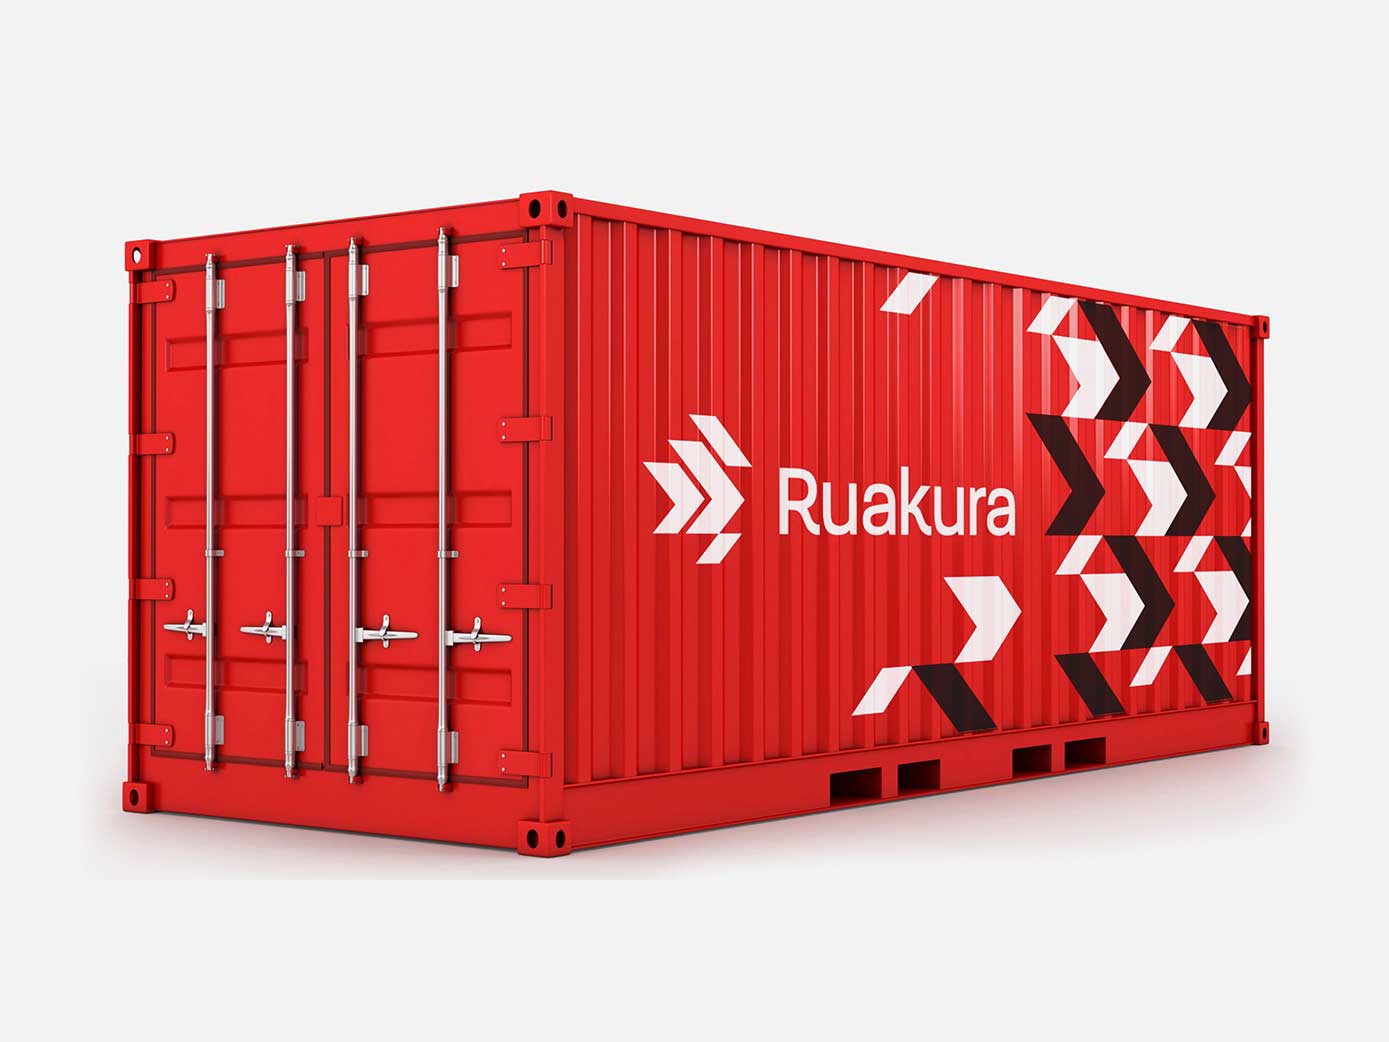 Ruakura pattern applied to a container